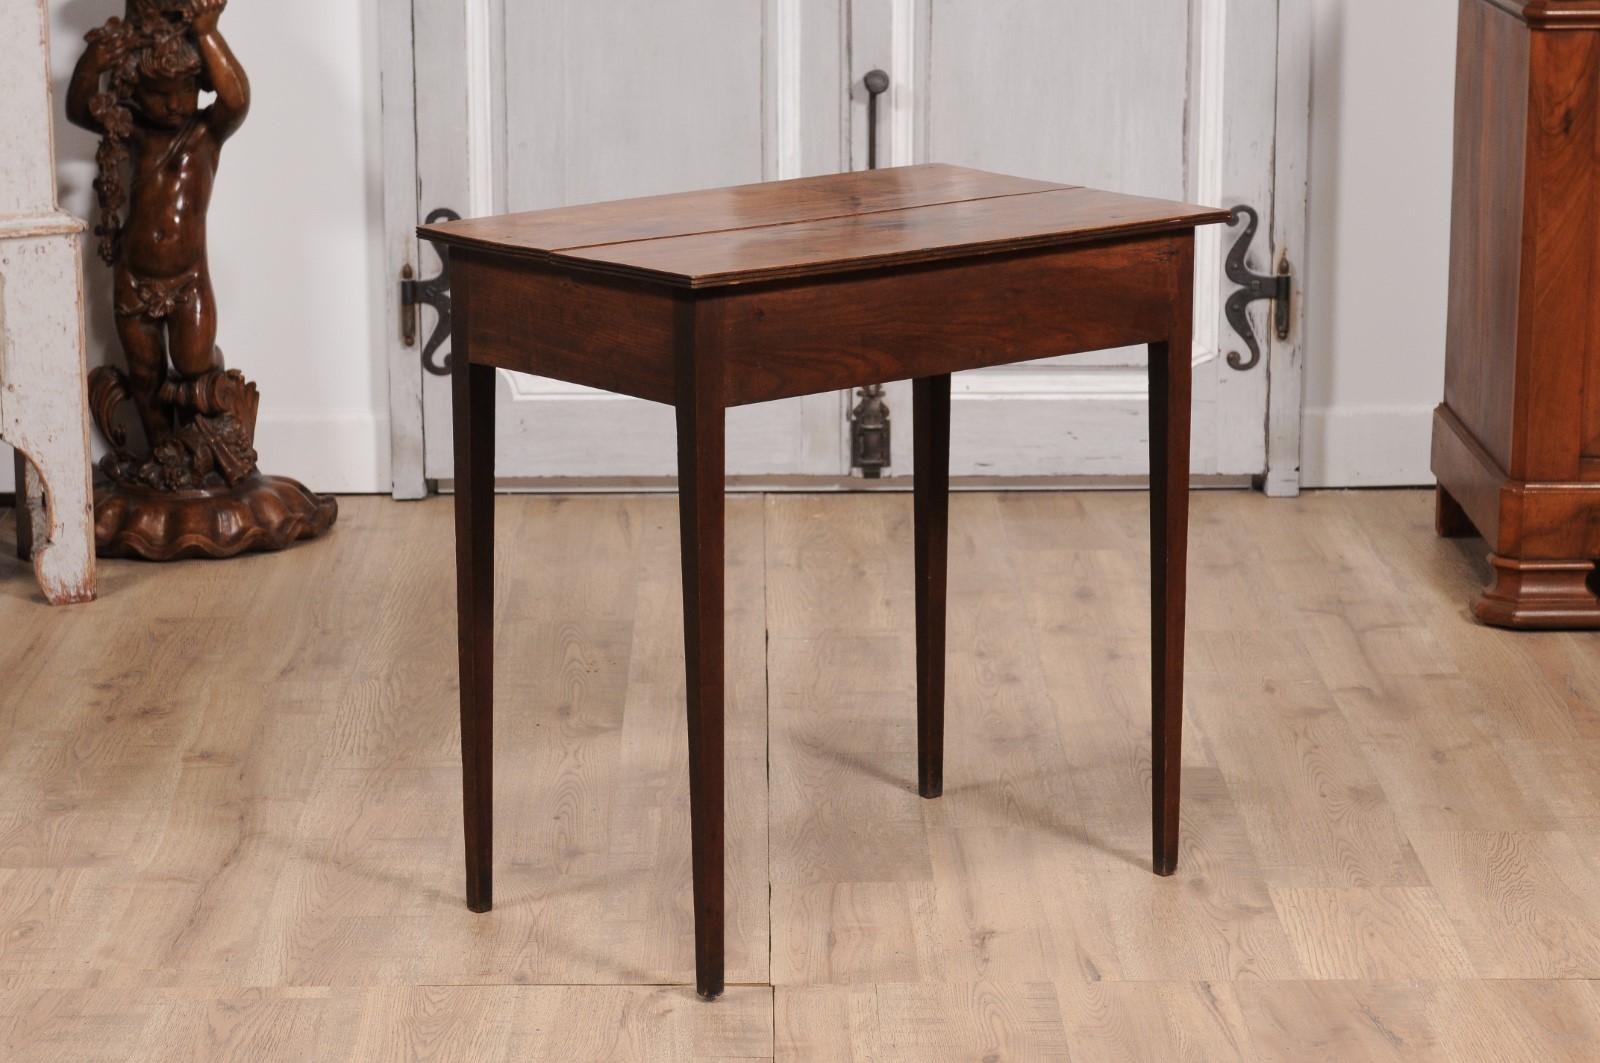 English Georgian Period 18th Century Fruitwood Side Table with Single Drawer For Sale 5